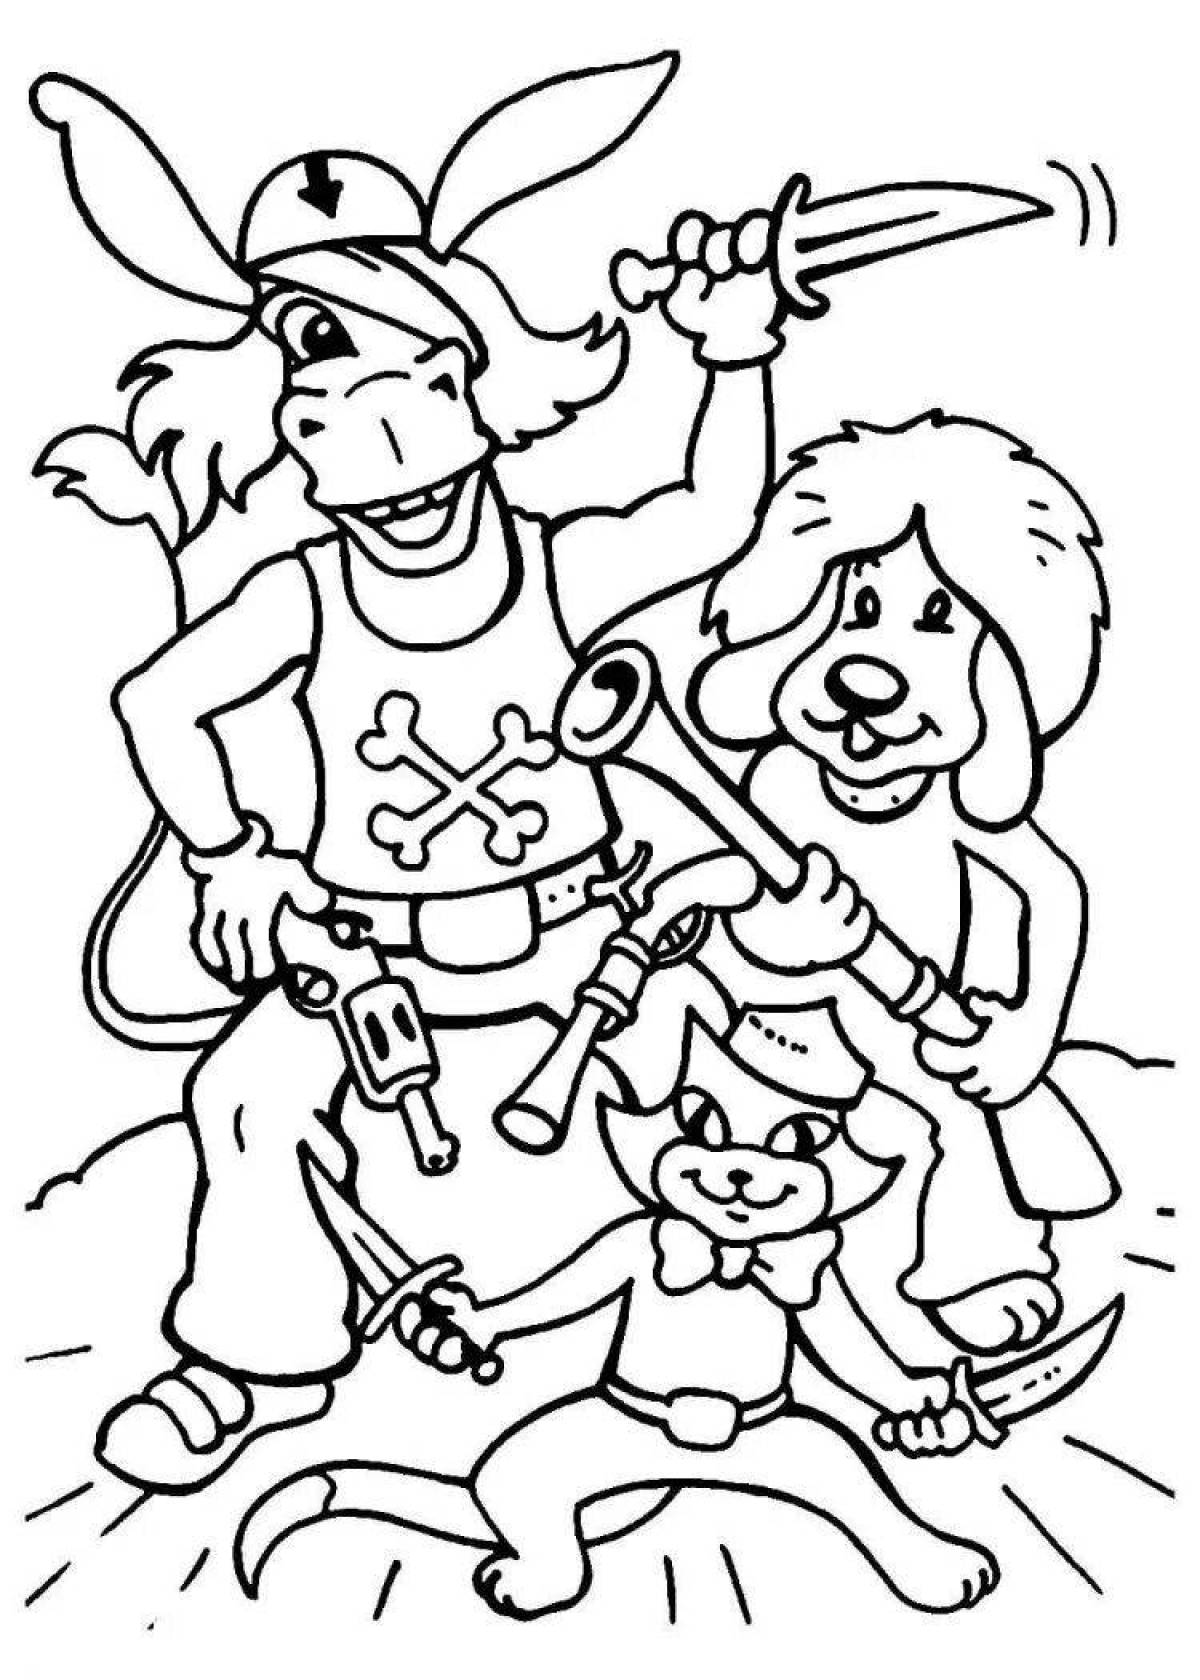 Coloring page inviting Bremen town musicians